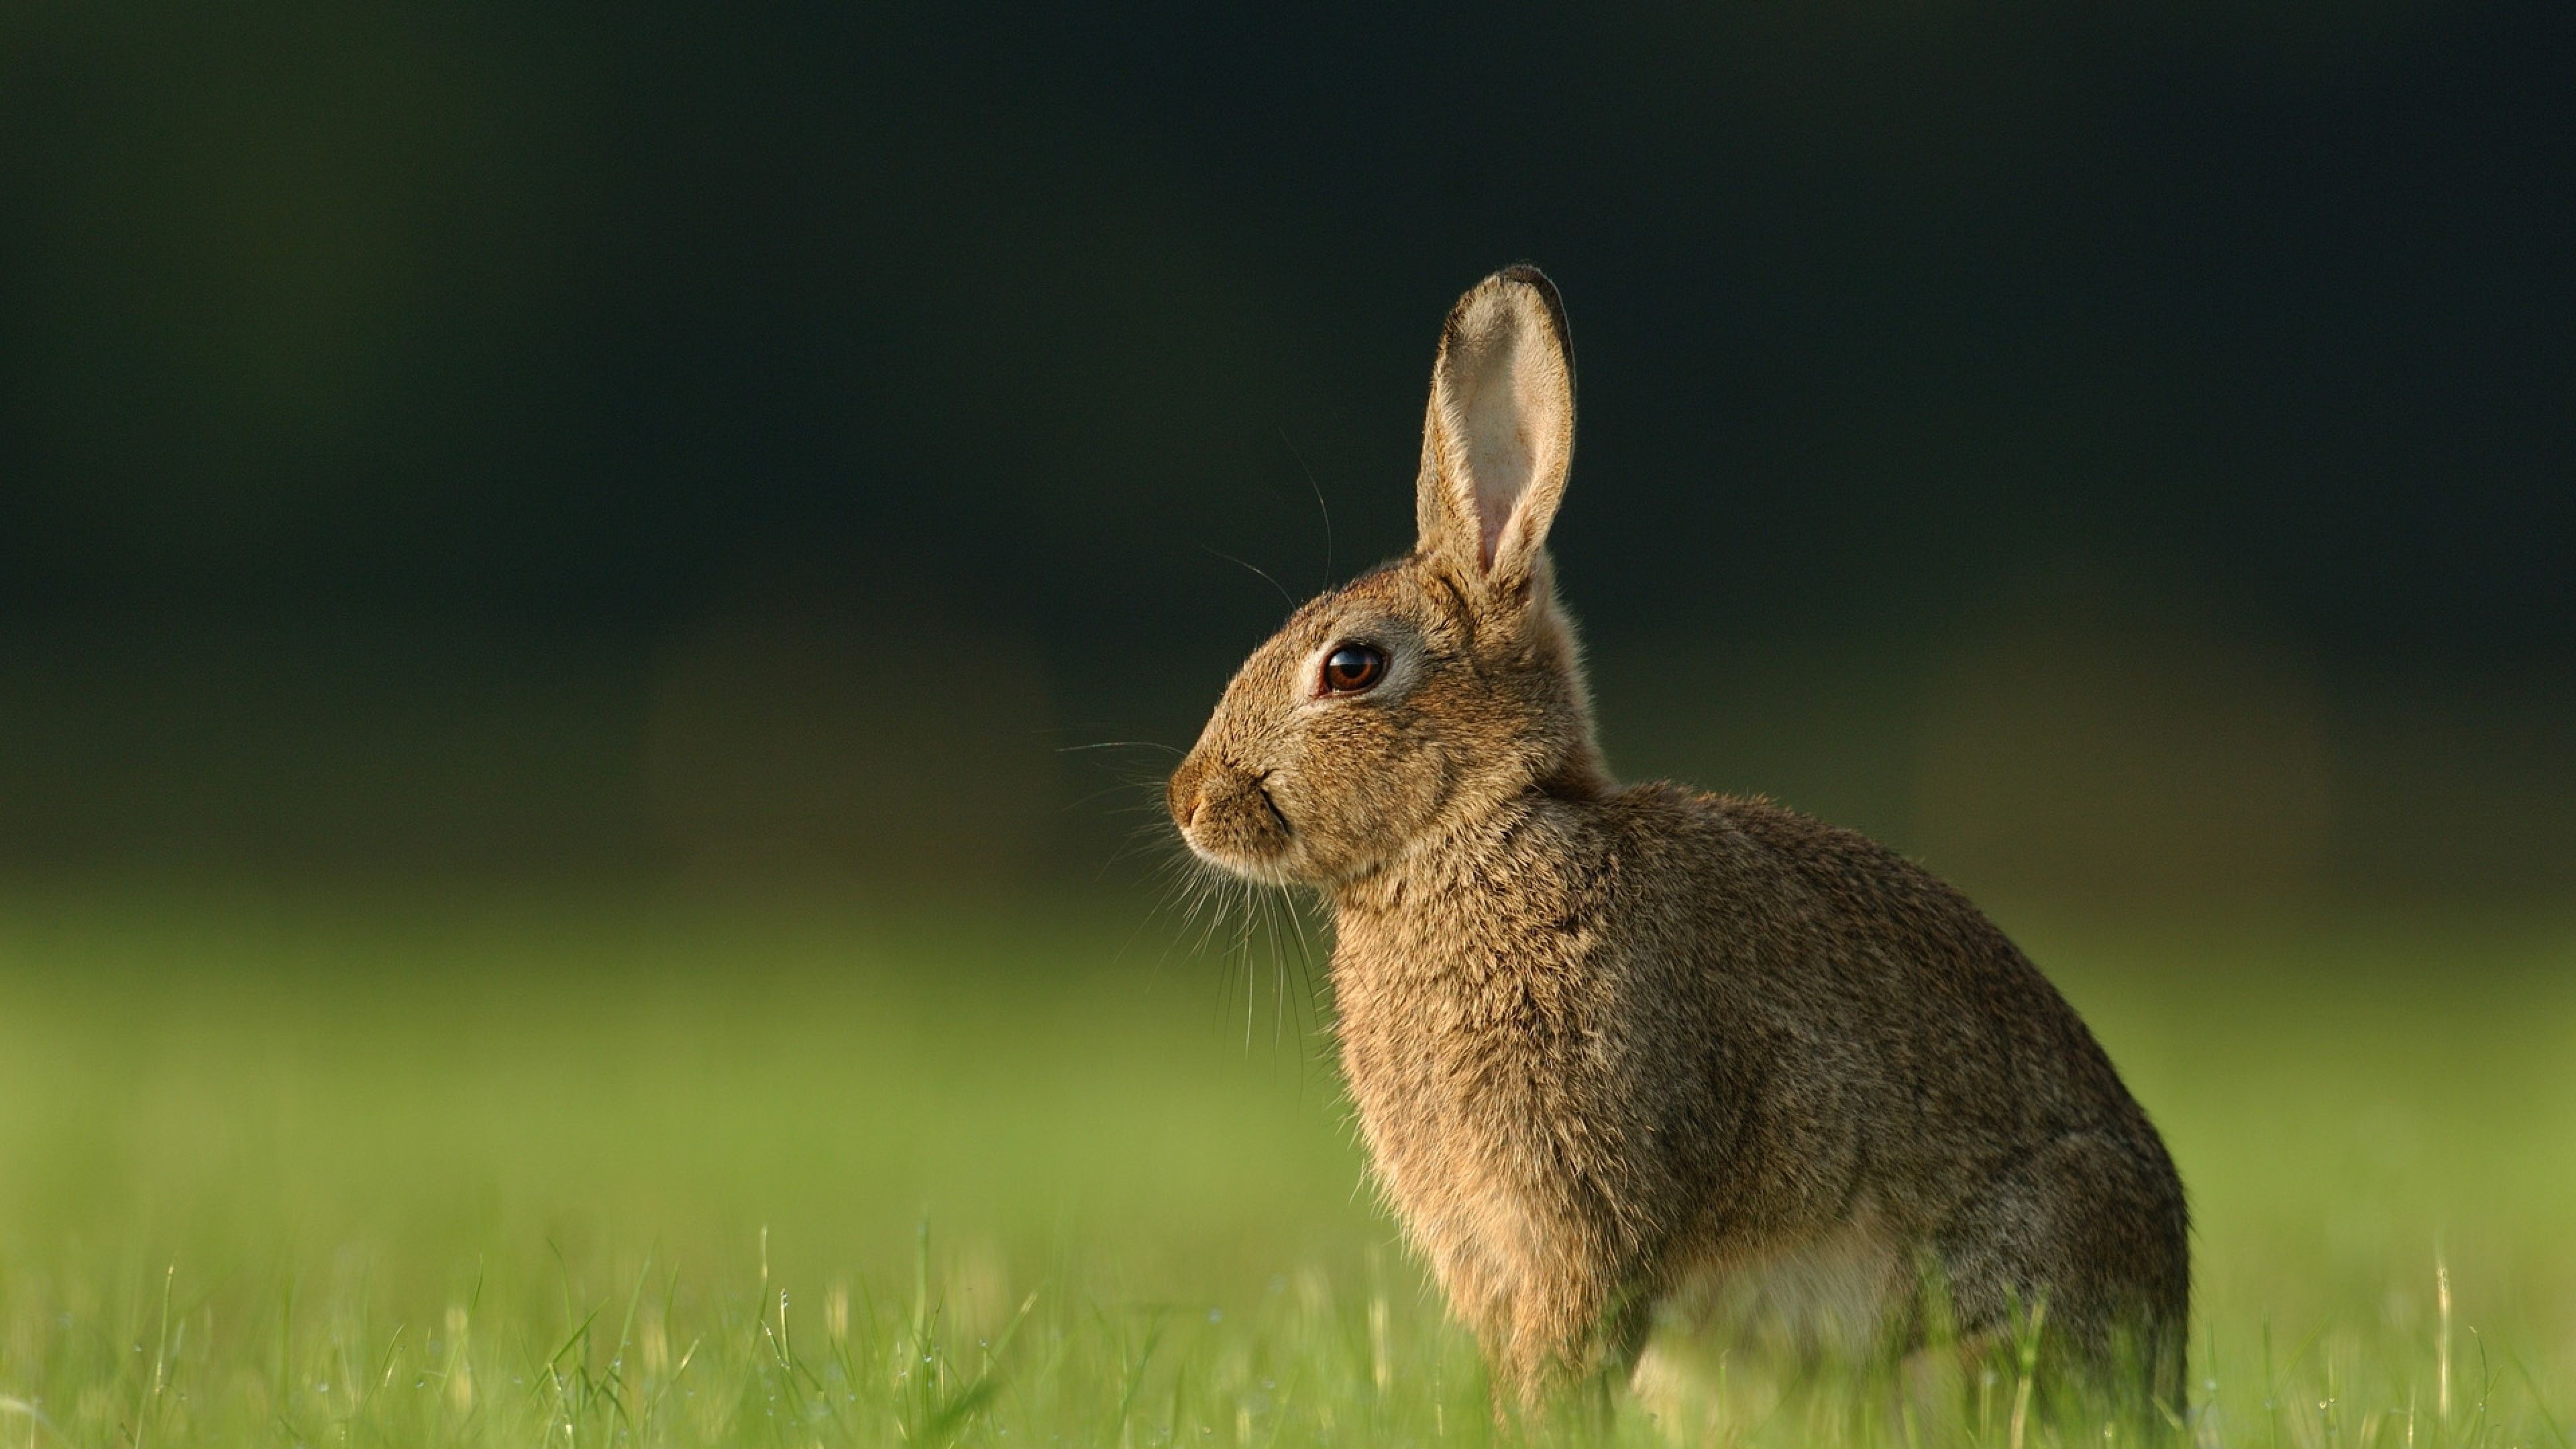 Hare wallpapers, Stunning visuals, Captivating designs, High quality, 3840x2160 4K Desktop